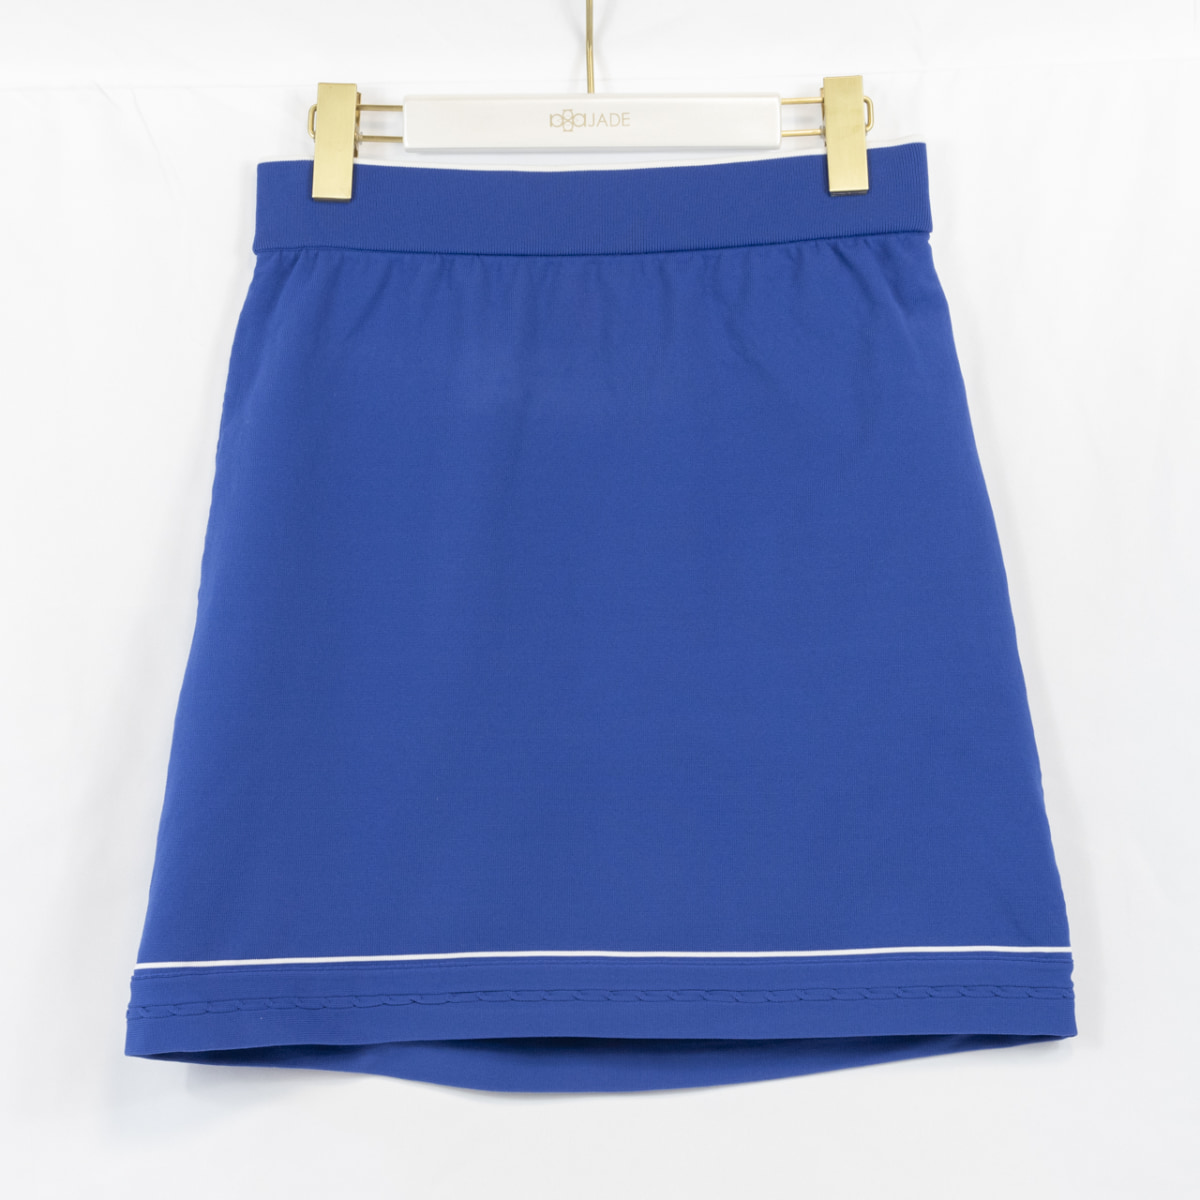 【SALE】Skirt – Water Resistance ～撥水ニットスカート～ blue-white